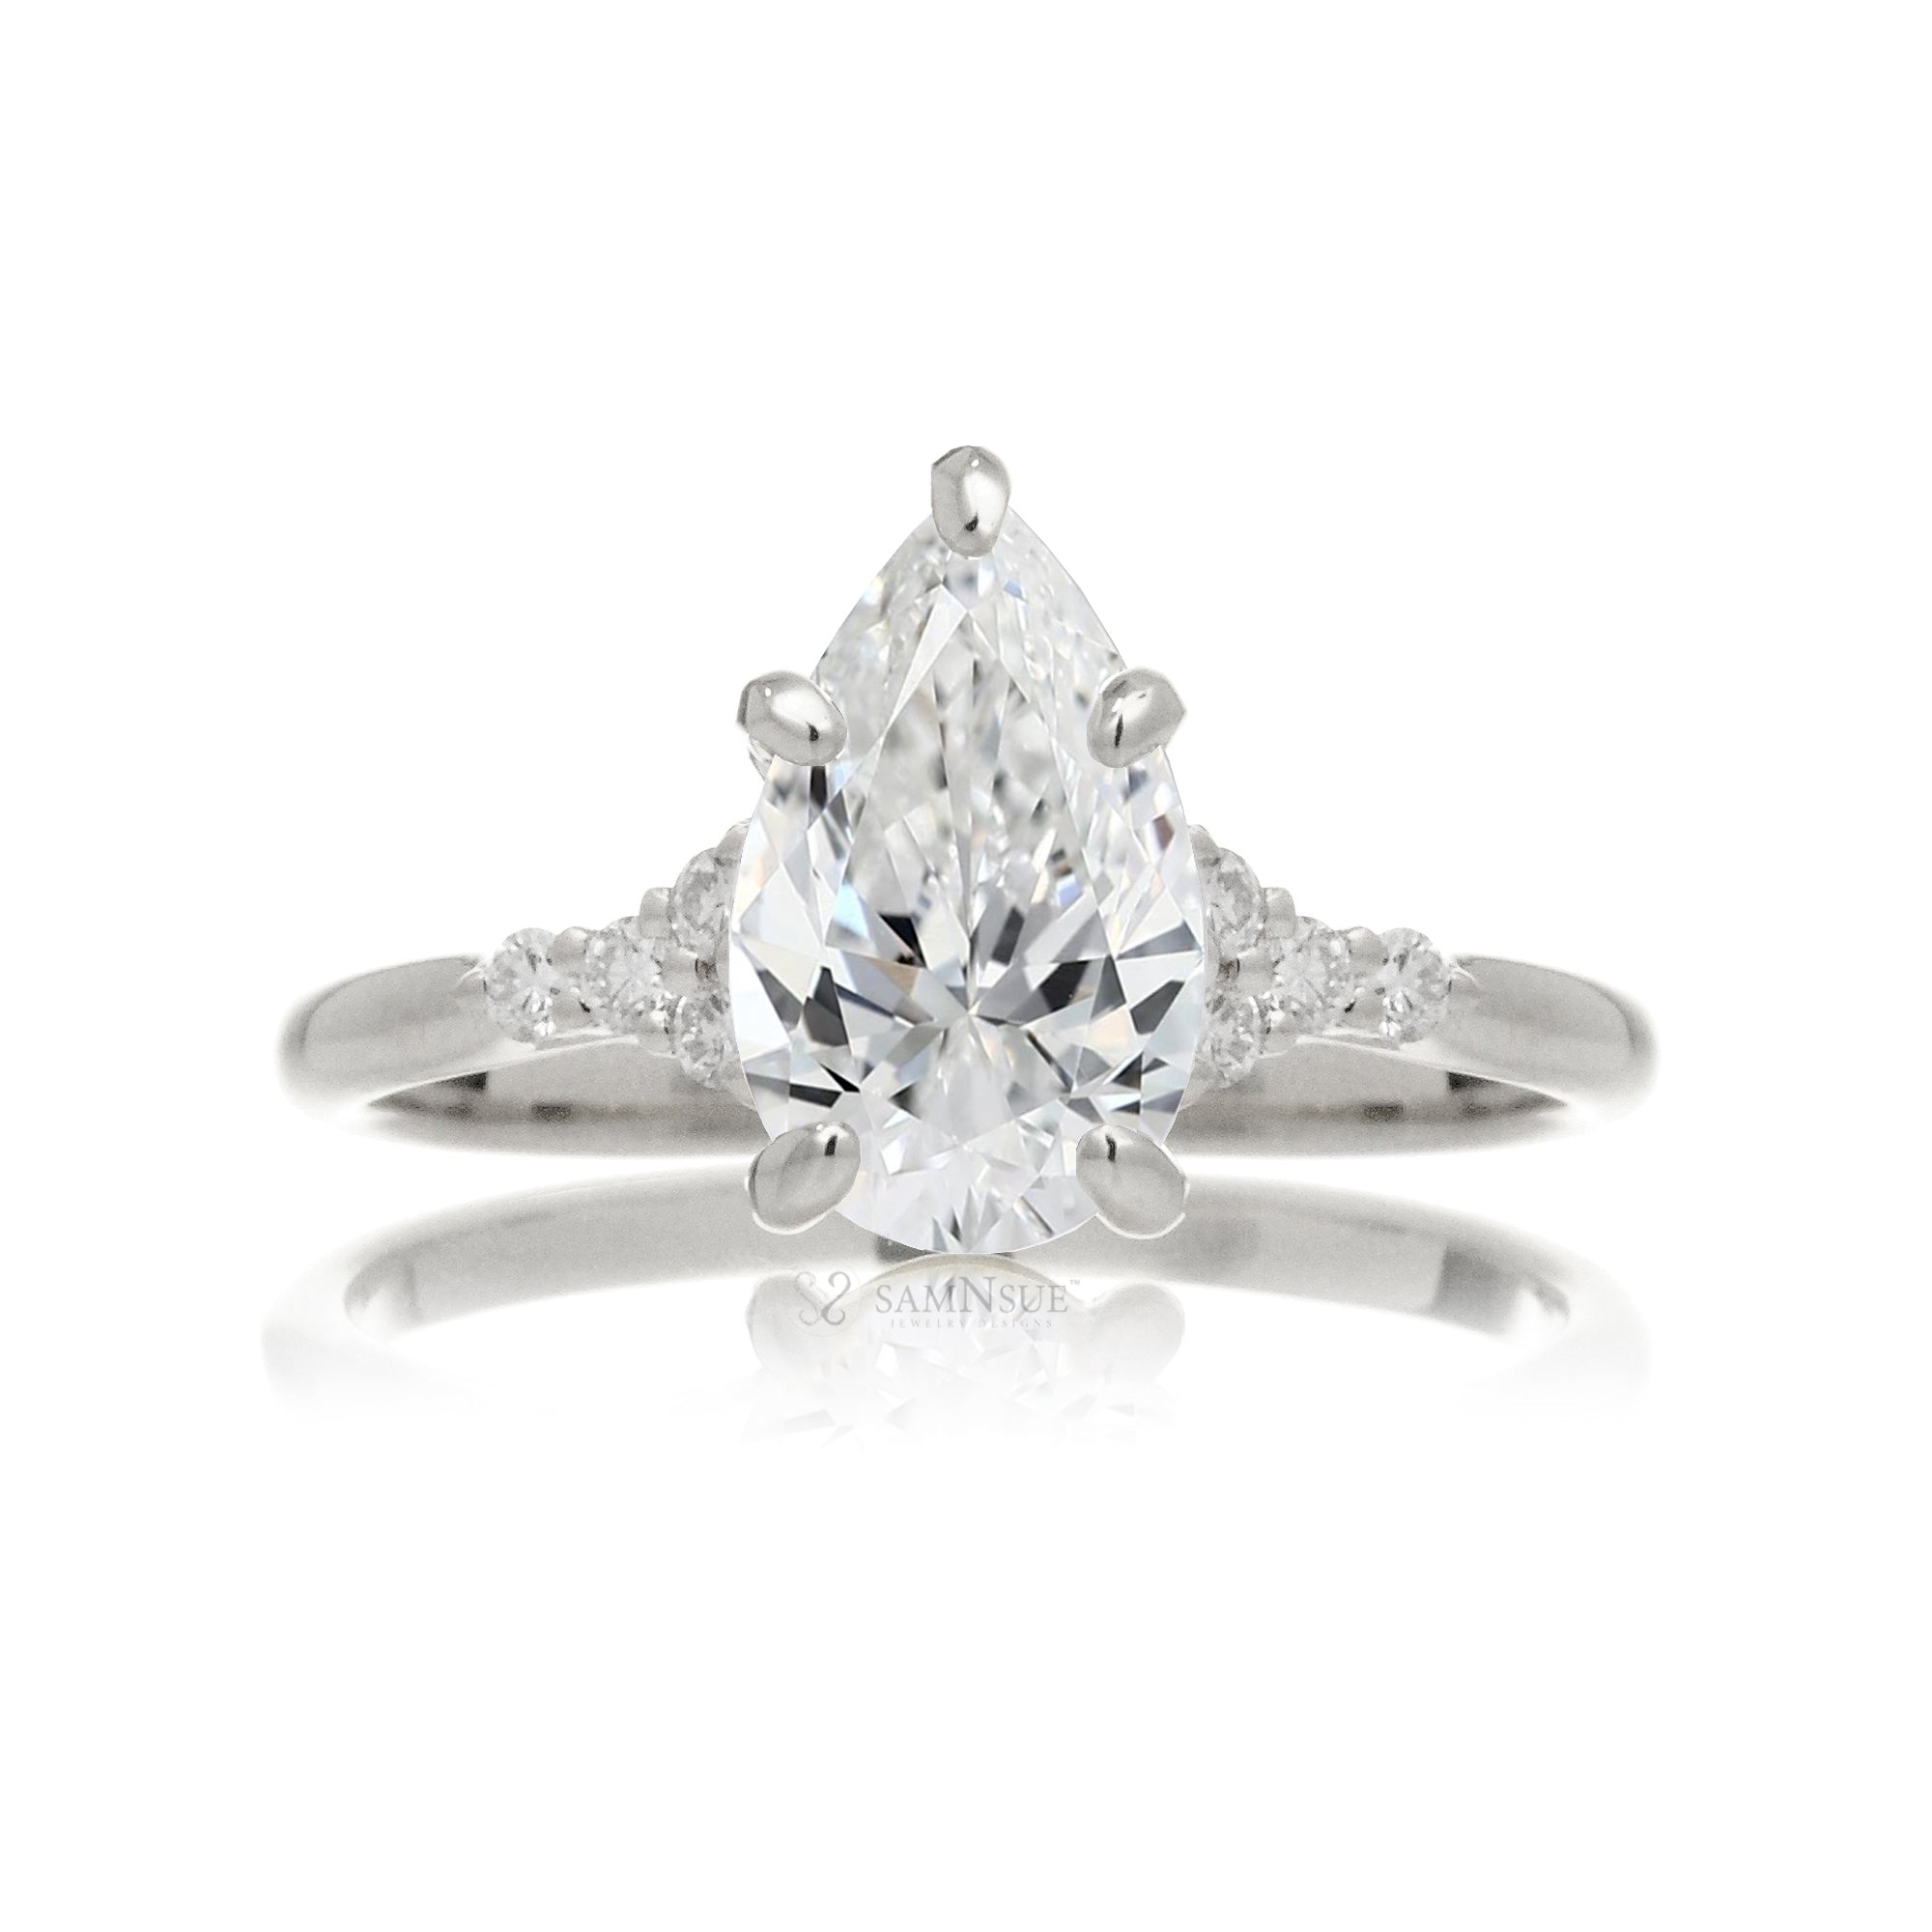 Pear shape diamond engagement ring in white gold - the Chloe